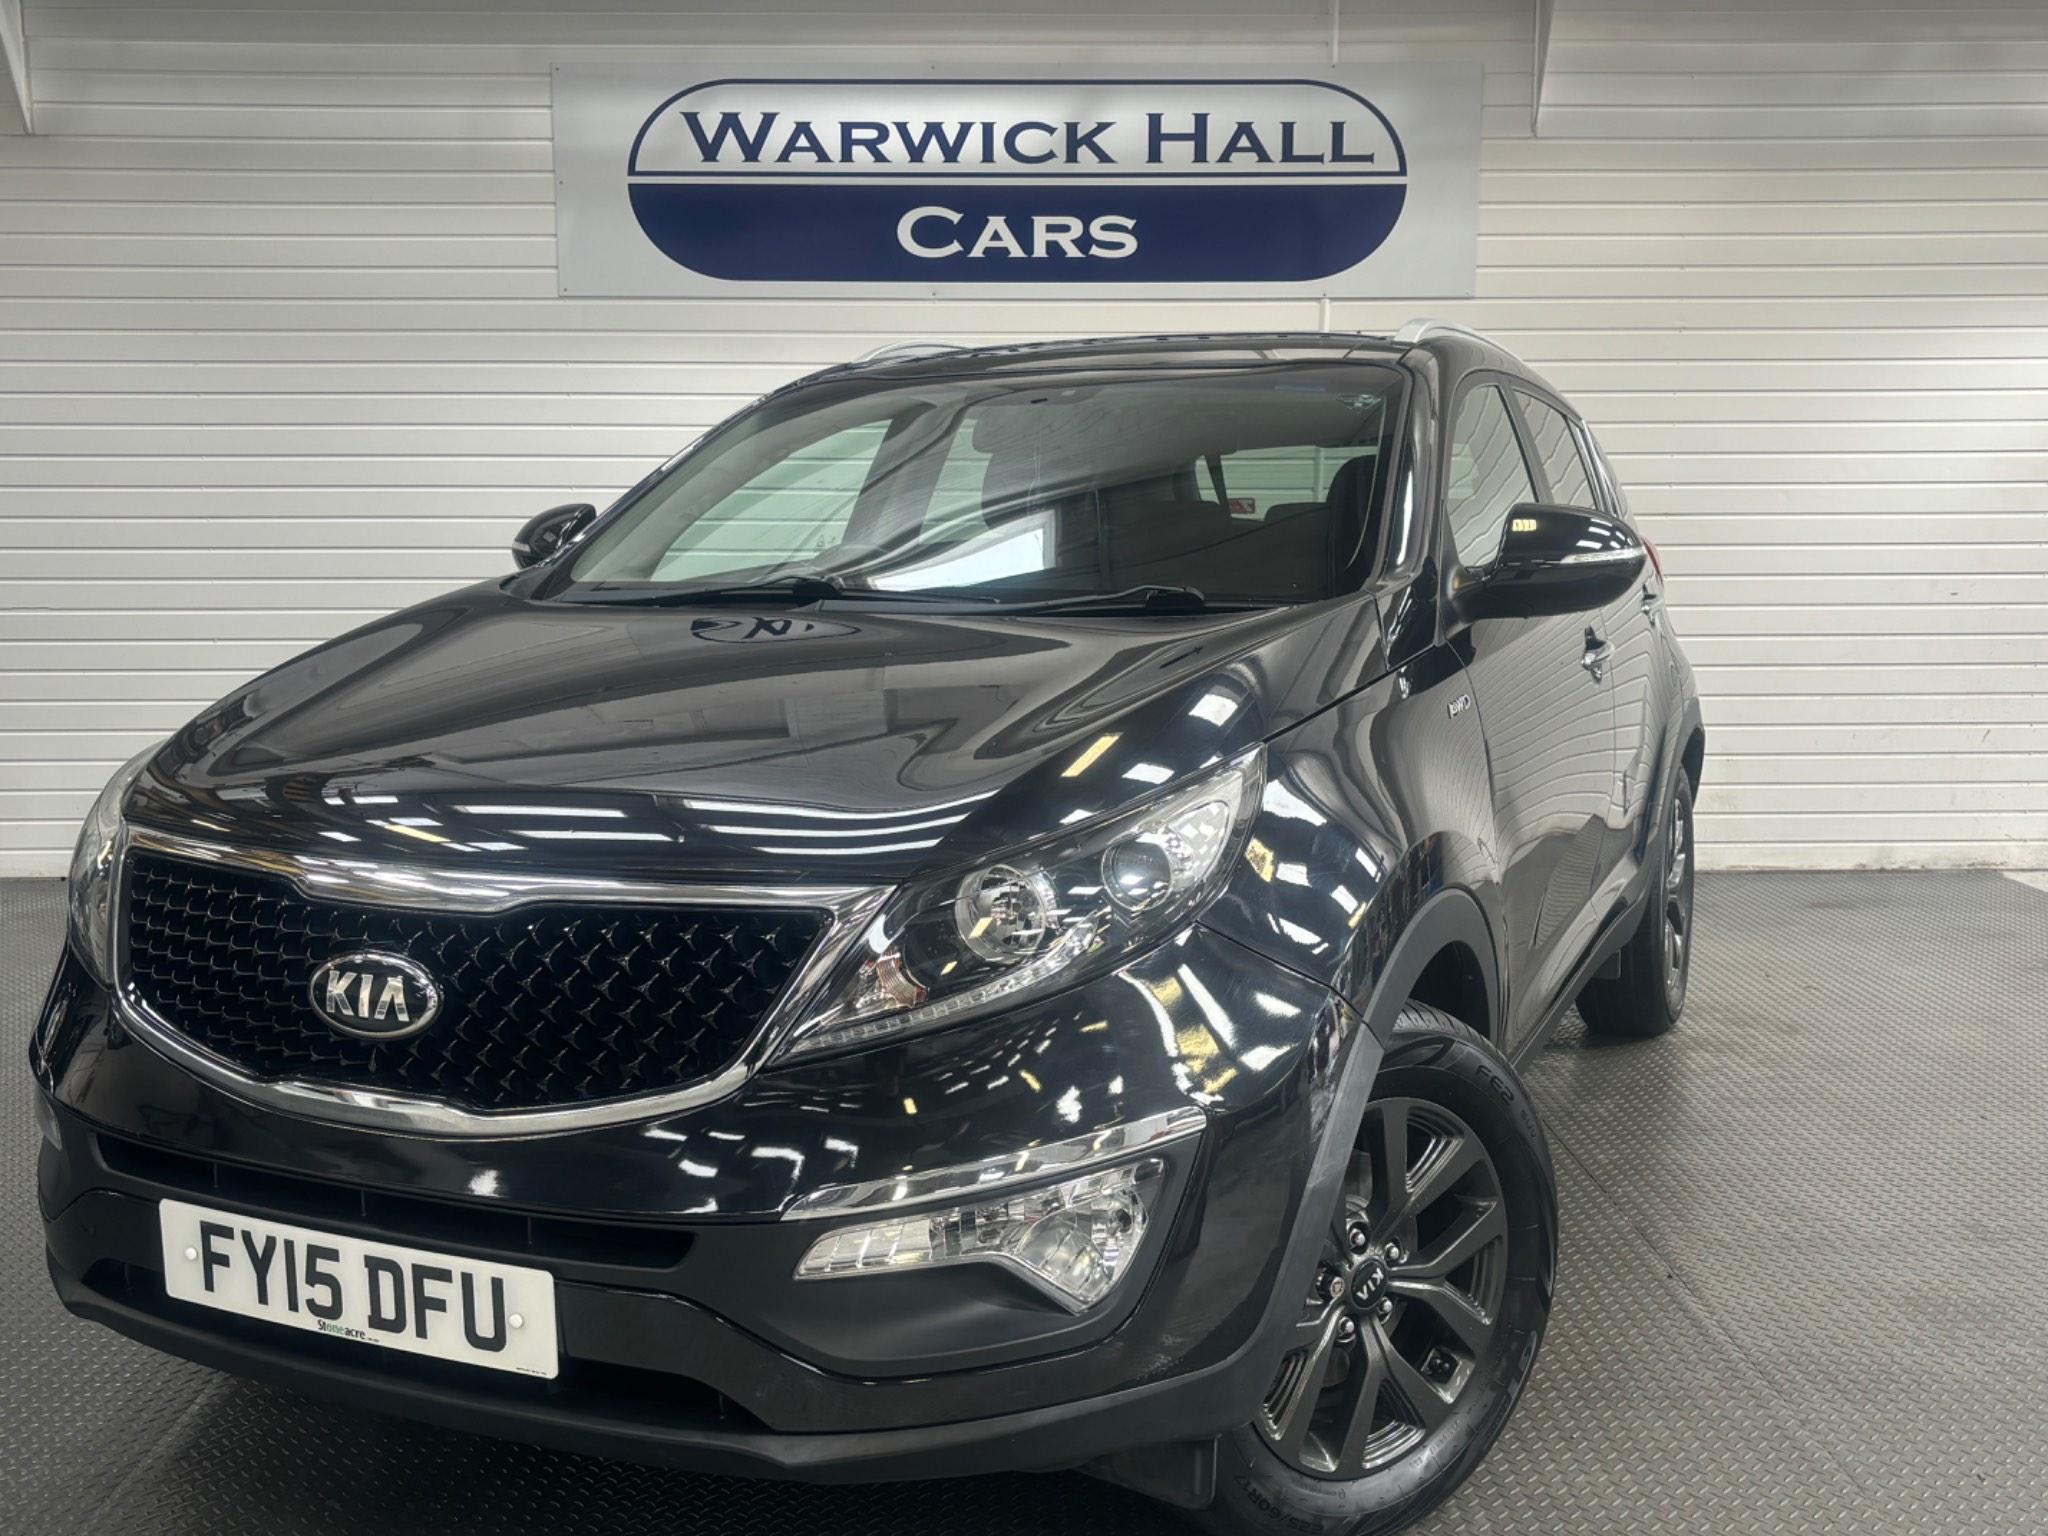 For Sale Kia Sportage 2.0 CRDi KX-2 AWD Euro 5 5dr in Greater Manchester